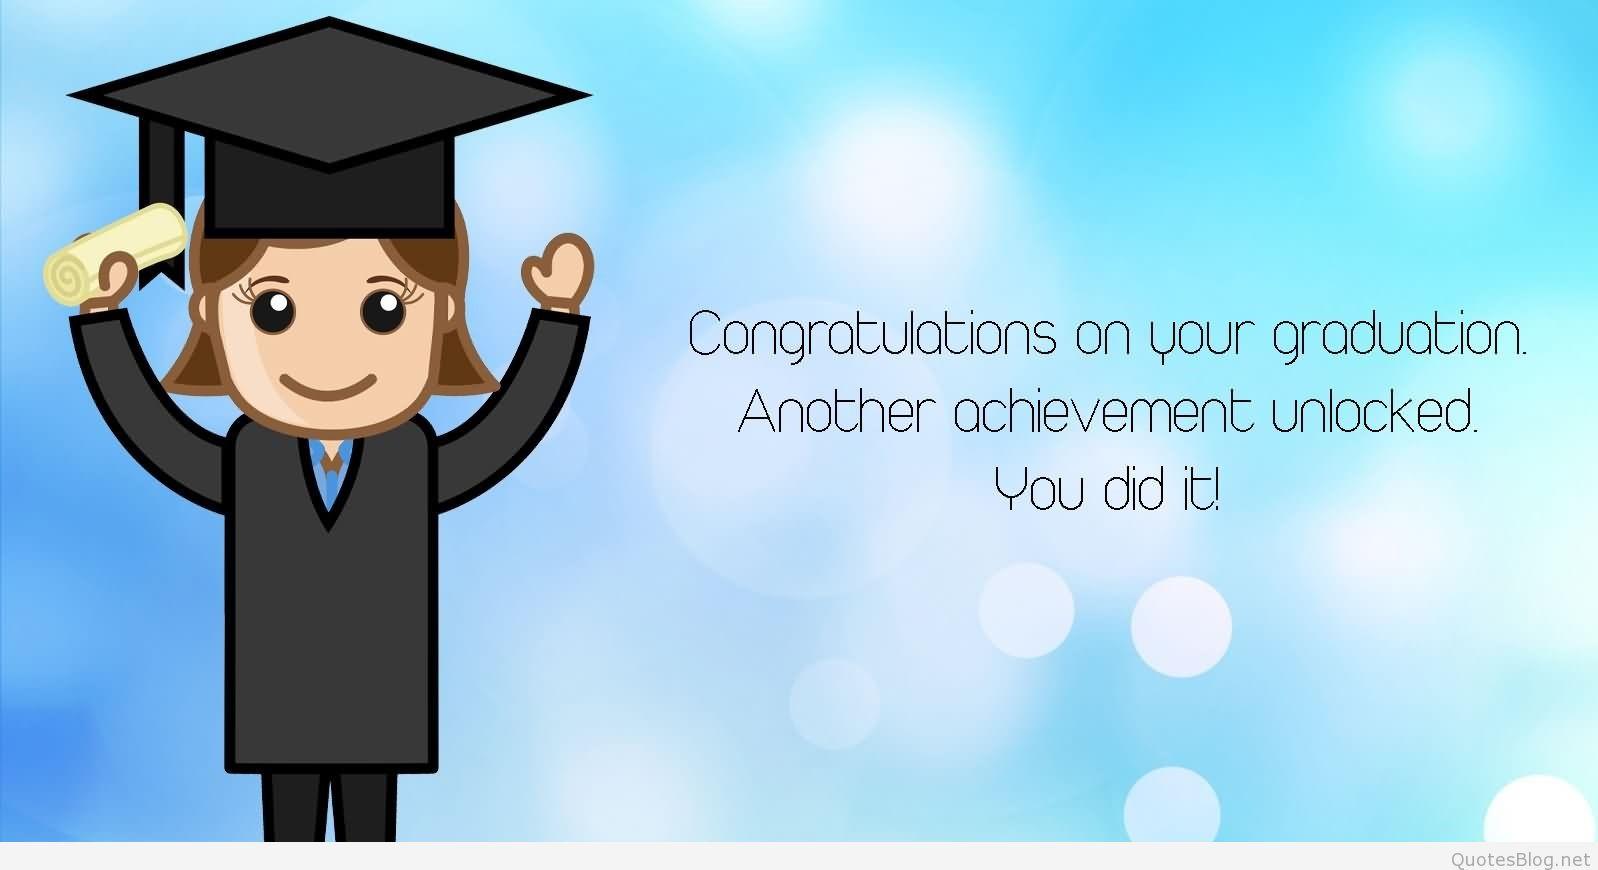 Graduation Congratulations Image, Gifs, Wishes and Messages